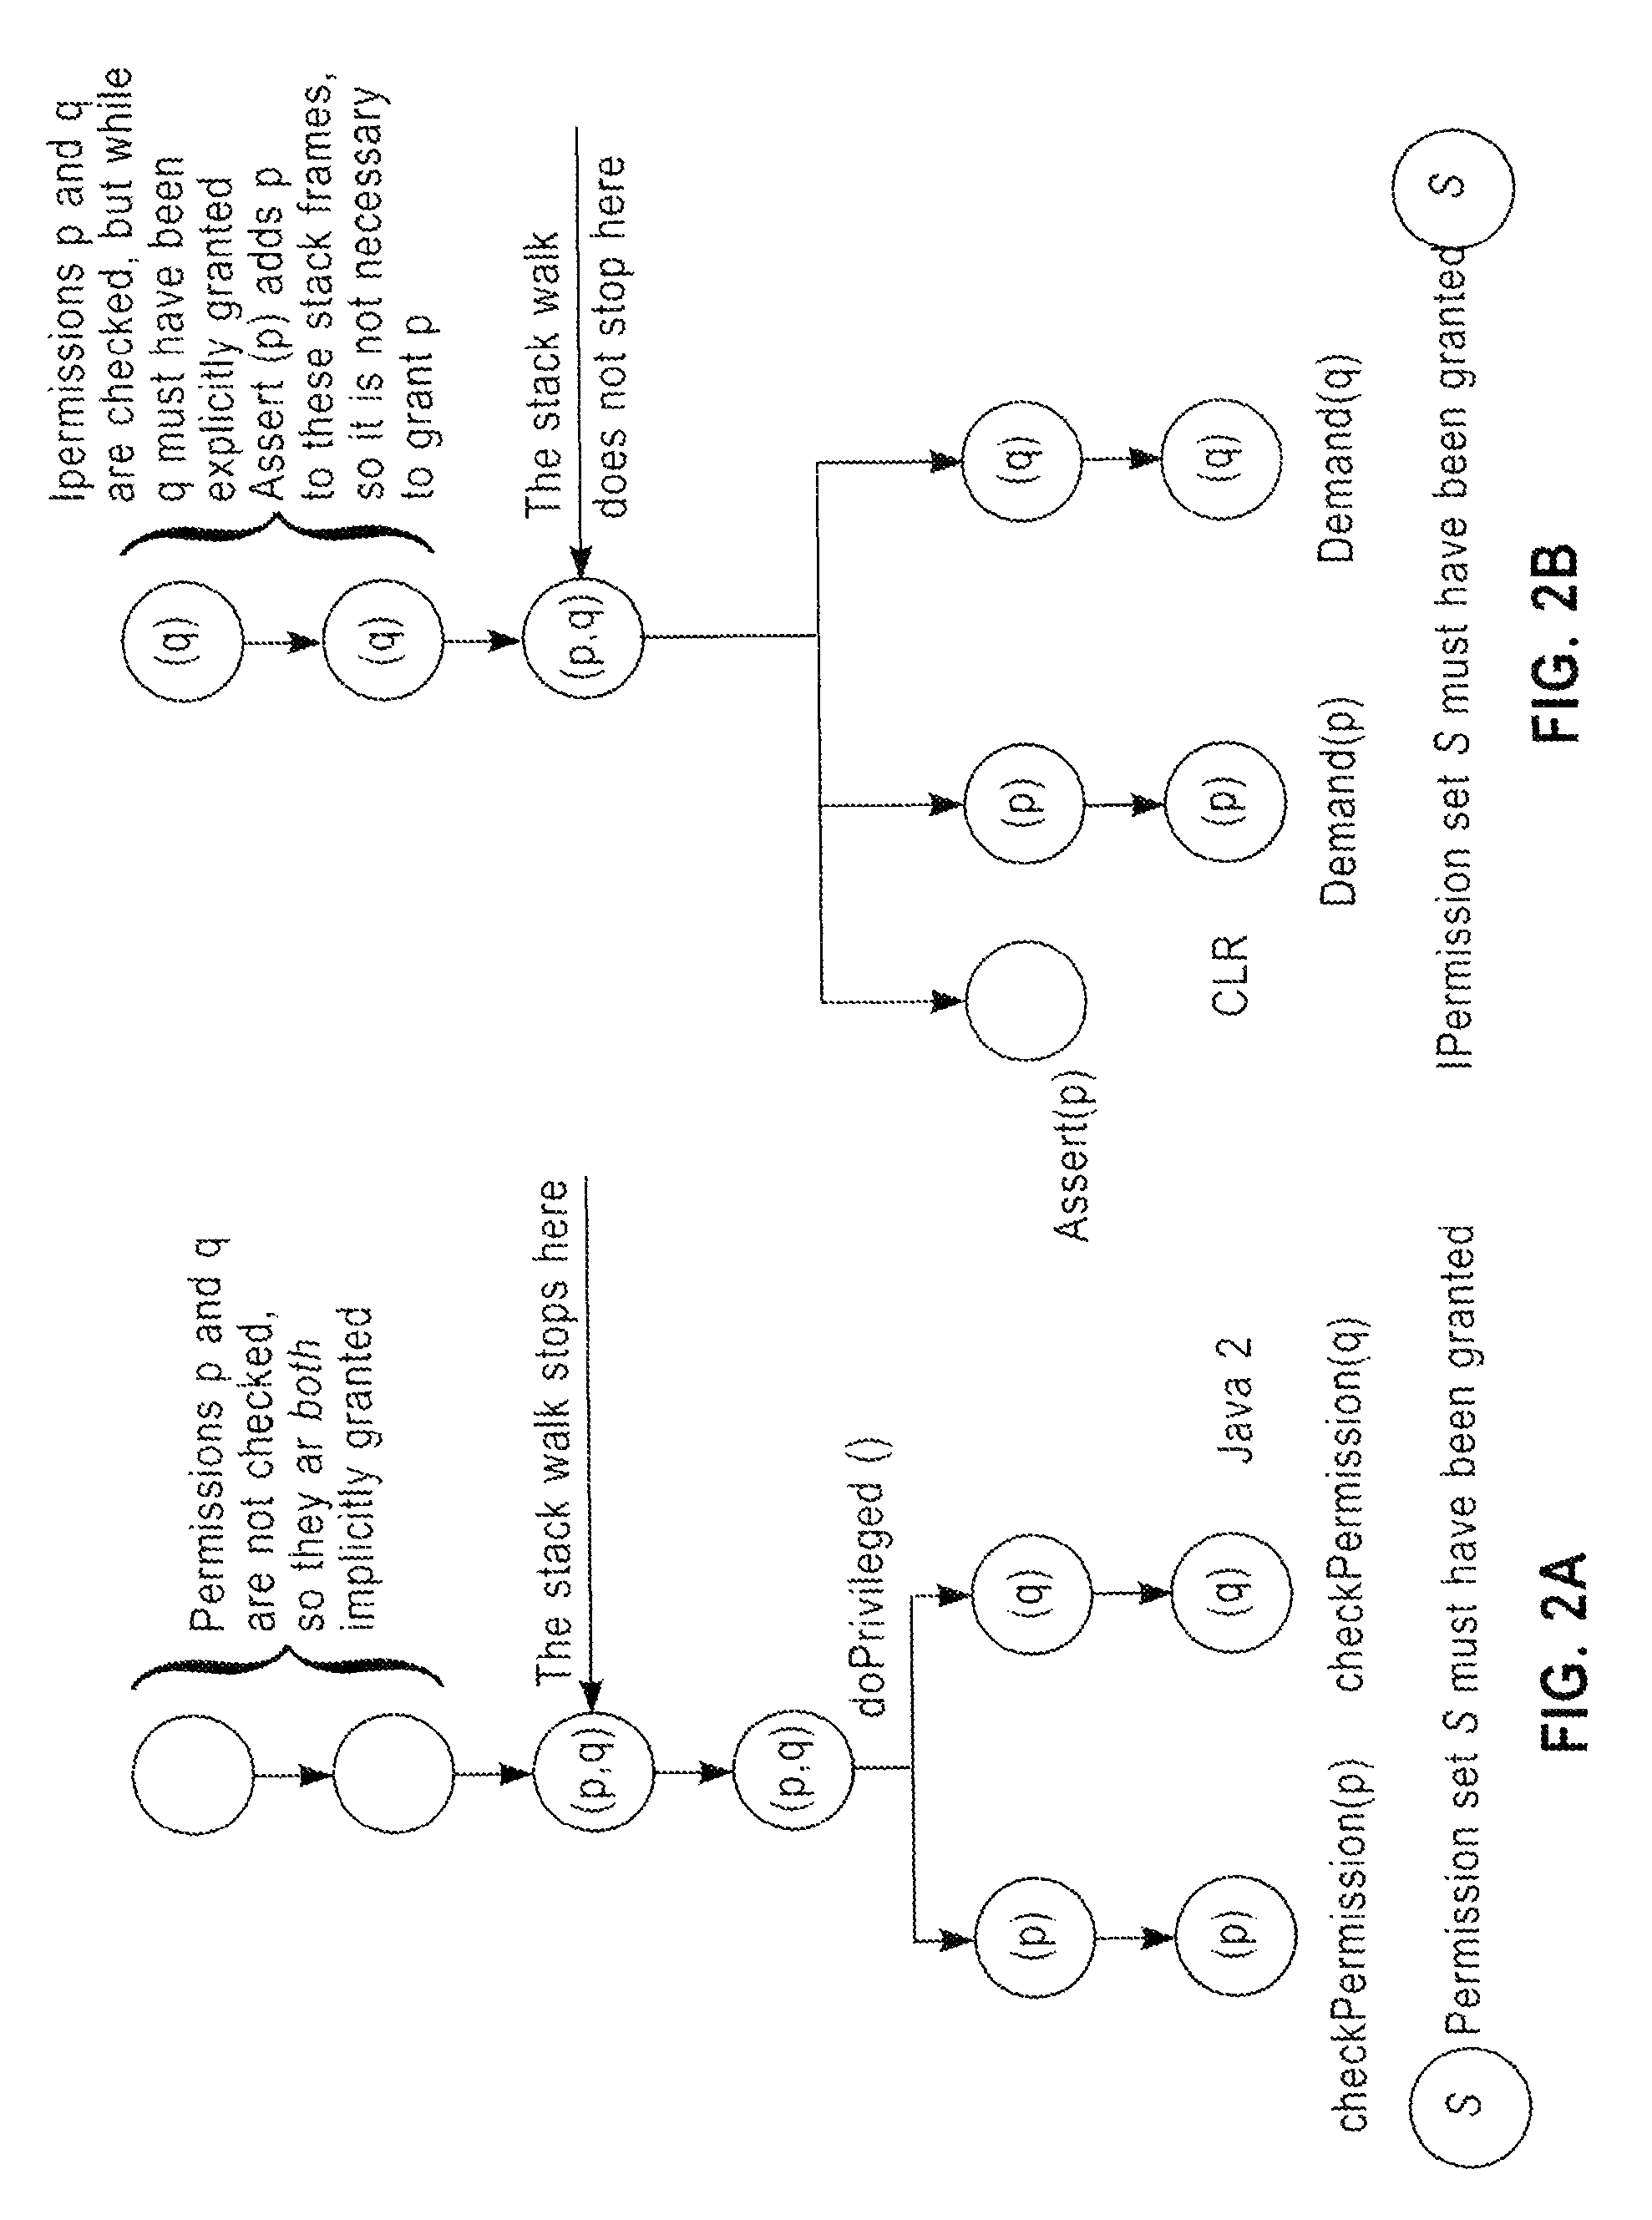 System and method for the automatic verification of privilege-asserting and subject-executed code